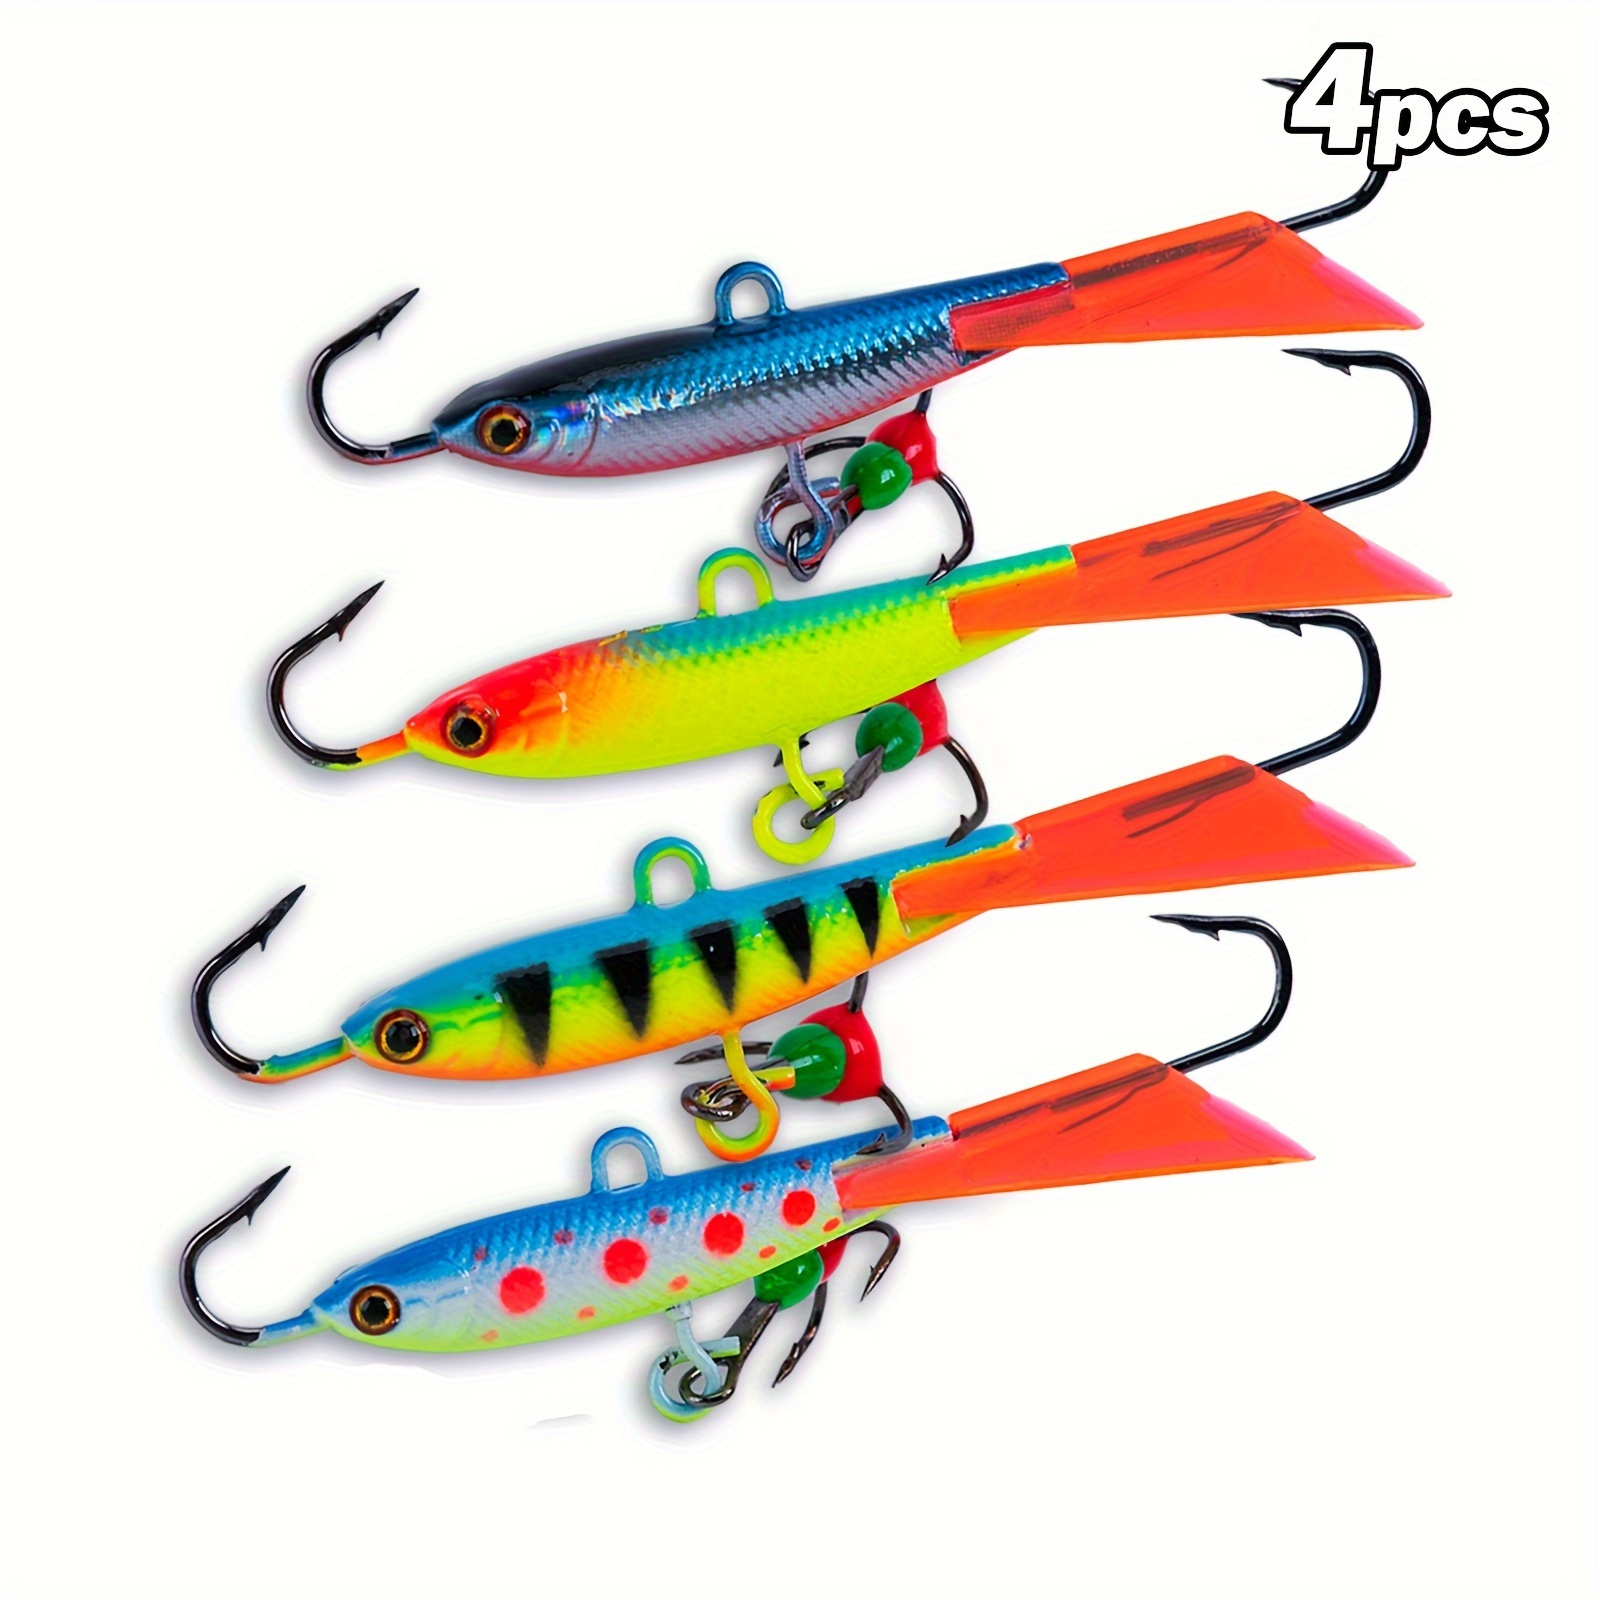  VIB Fishing Lures, Anti Rust Fishing Lures Super Long Cast  Minnow Fishing Lures for Trout for Bass for Perch : Sports & Outdoors